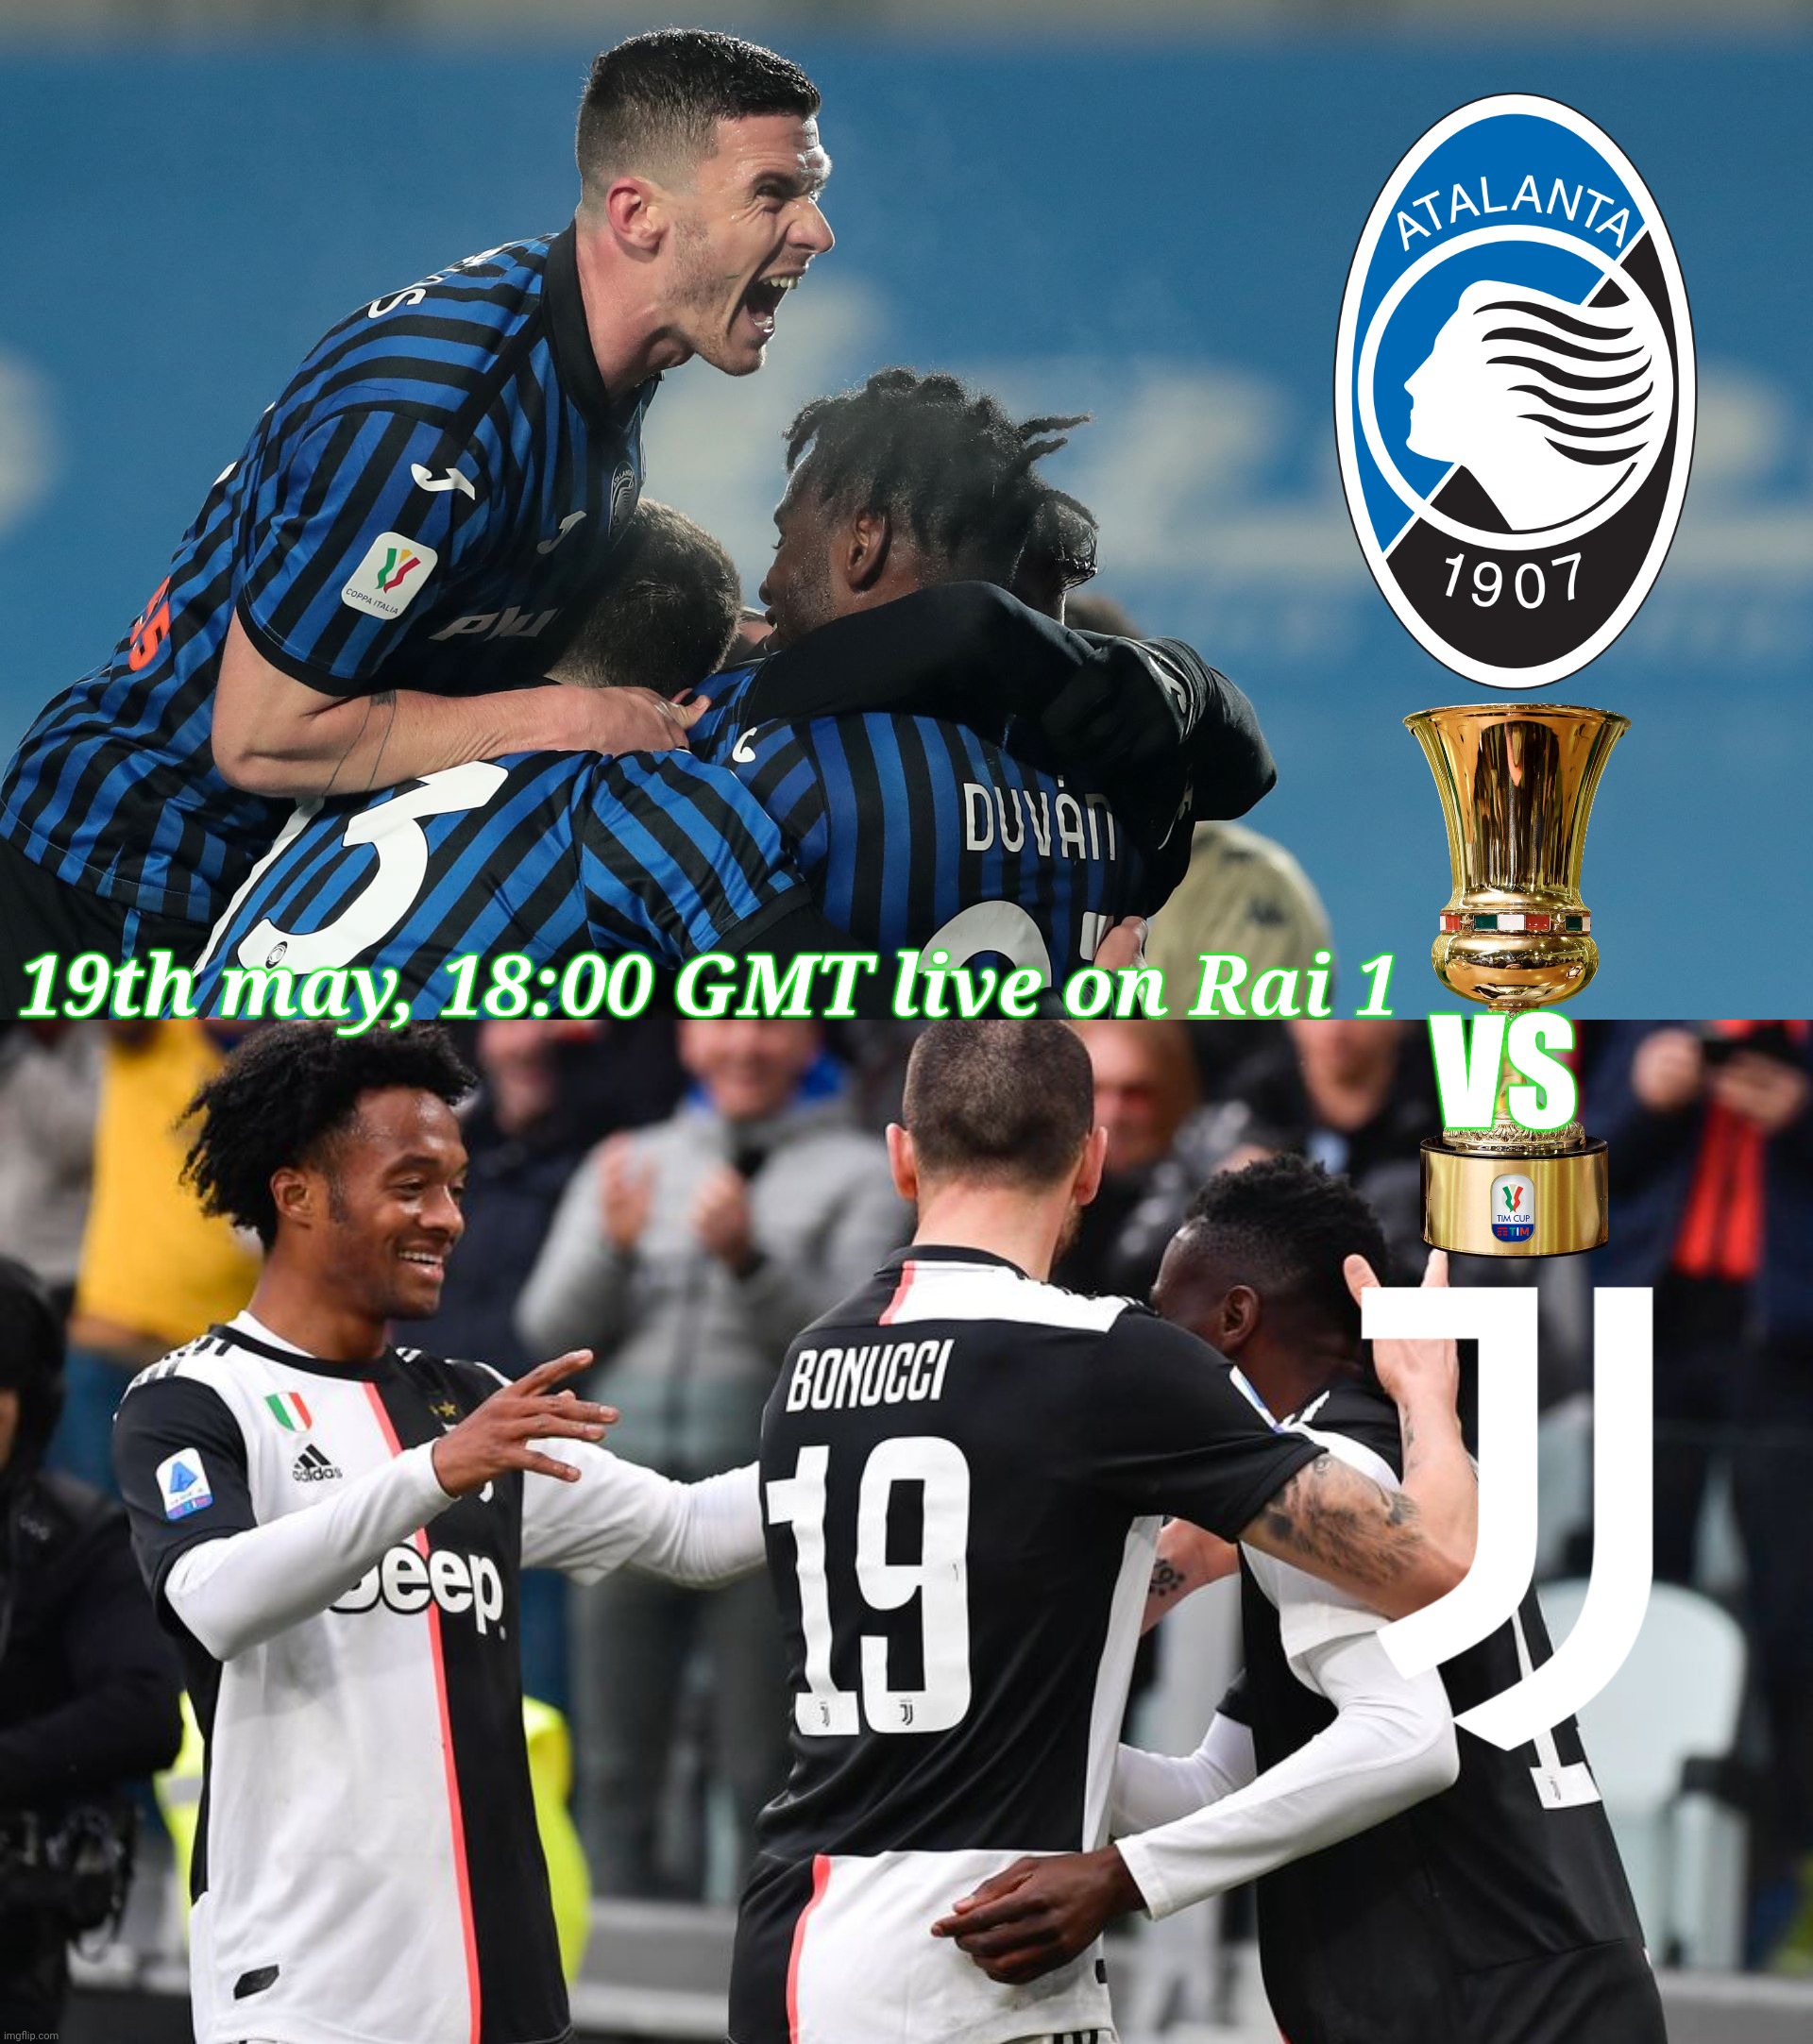 Who will triumph the Italian Cup? Find out on Atalanta vs Juventus live on Rai 1! | VS; 19th may, 18:00 GMT live on Rai 1 | image tagged in memes,calcio,juventus,atalanta | made w/ Imgflip meme maker